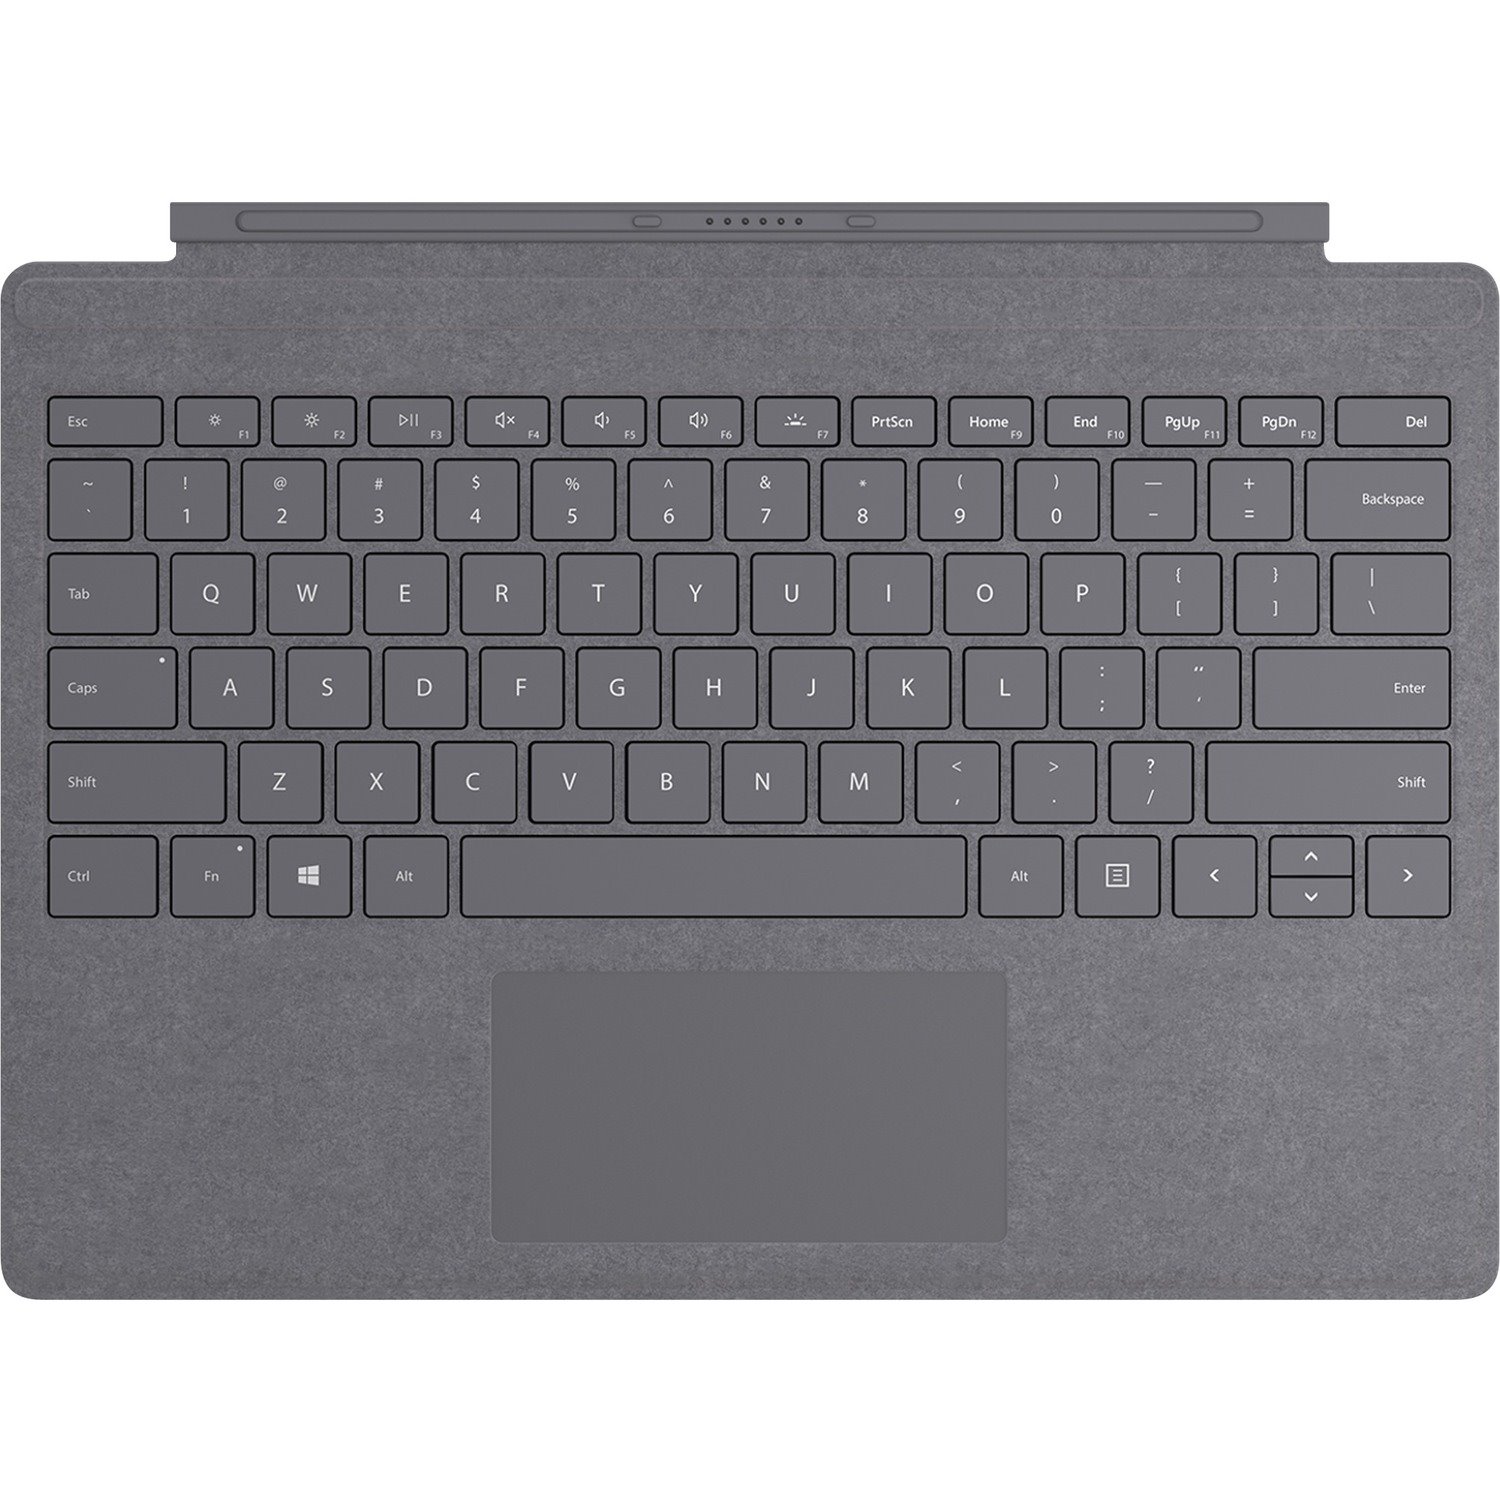 Microsoft Signature Type Cover Keyboard/Cover Case Microsoft Surface Pro (5th Gen), Surface Pro 3, Surface Pro 4, Surface Pro 6, Surface Pro 7 Tablet - Light Charcoal